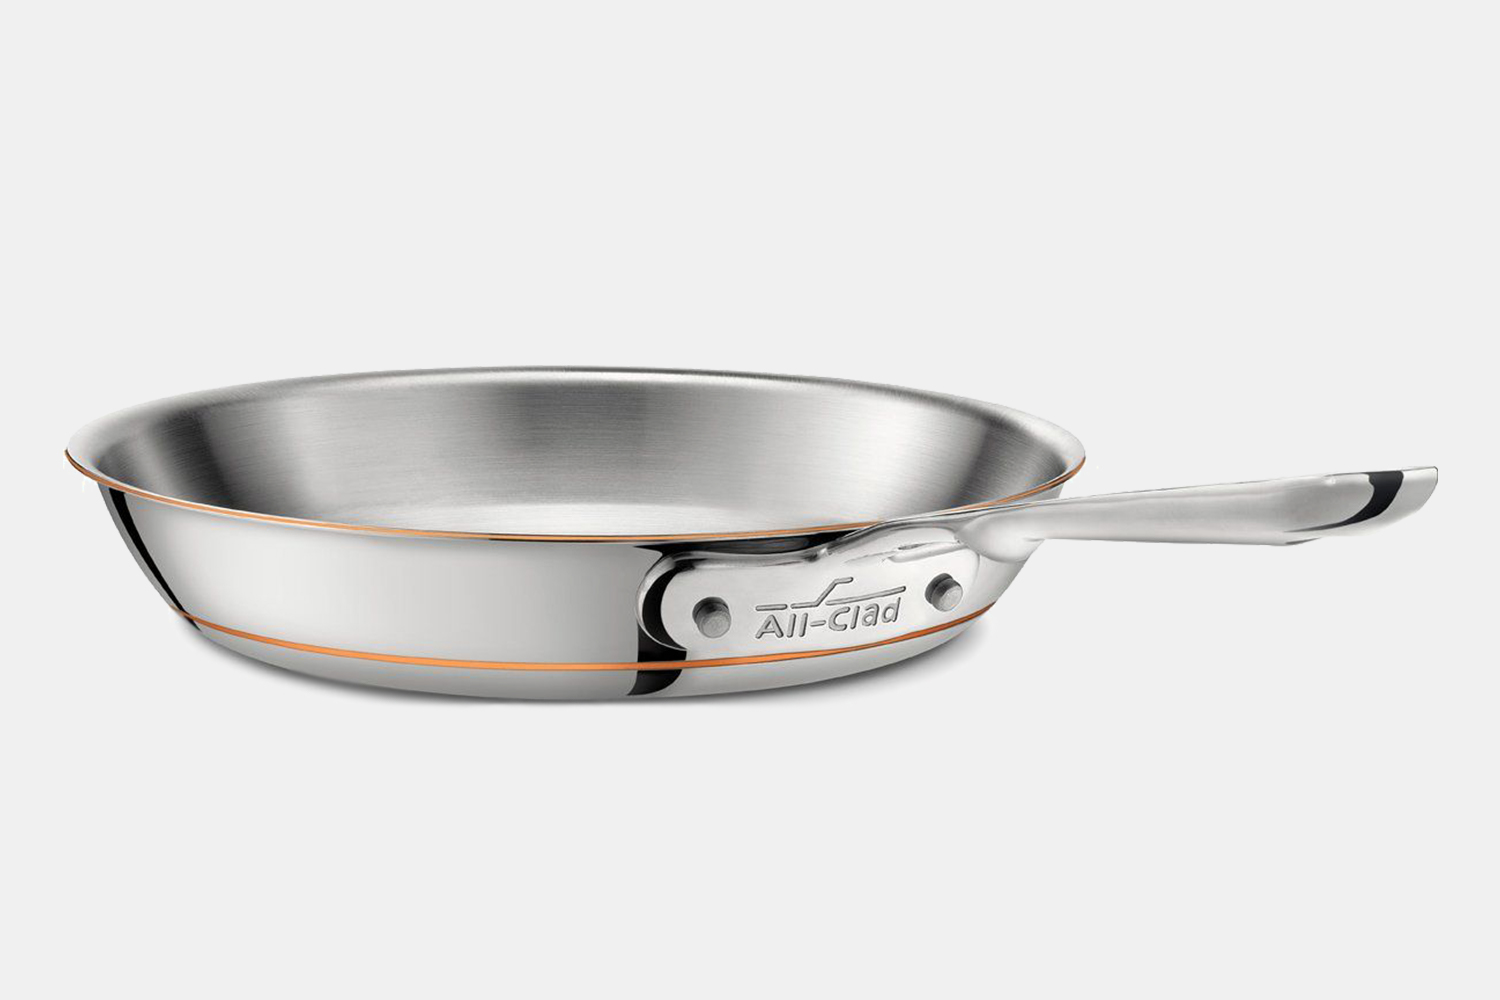 All-Clad 10-Inch Copper Core Fry Pan